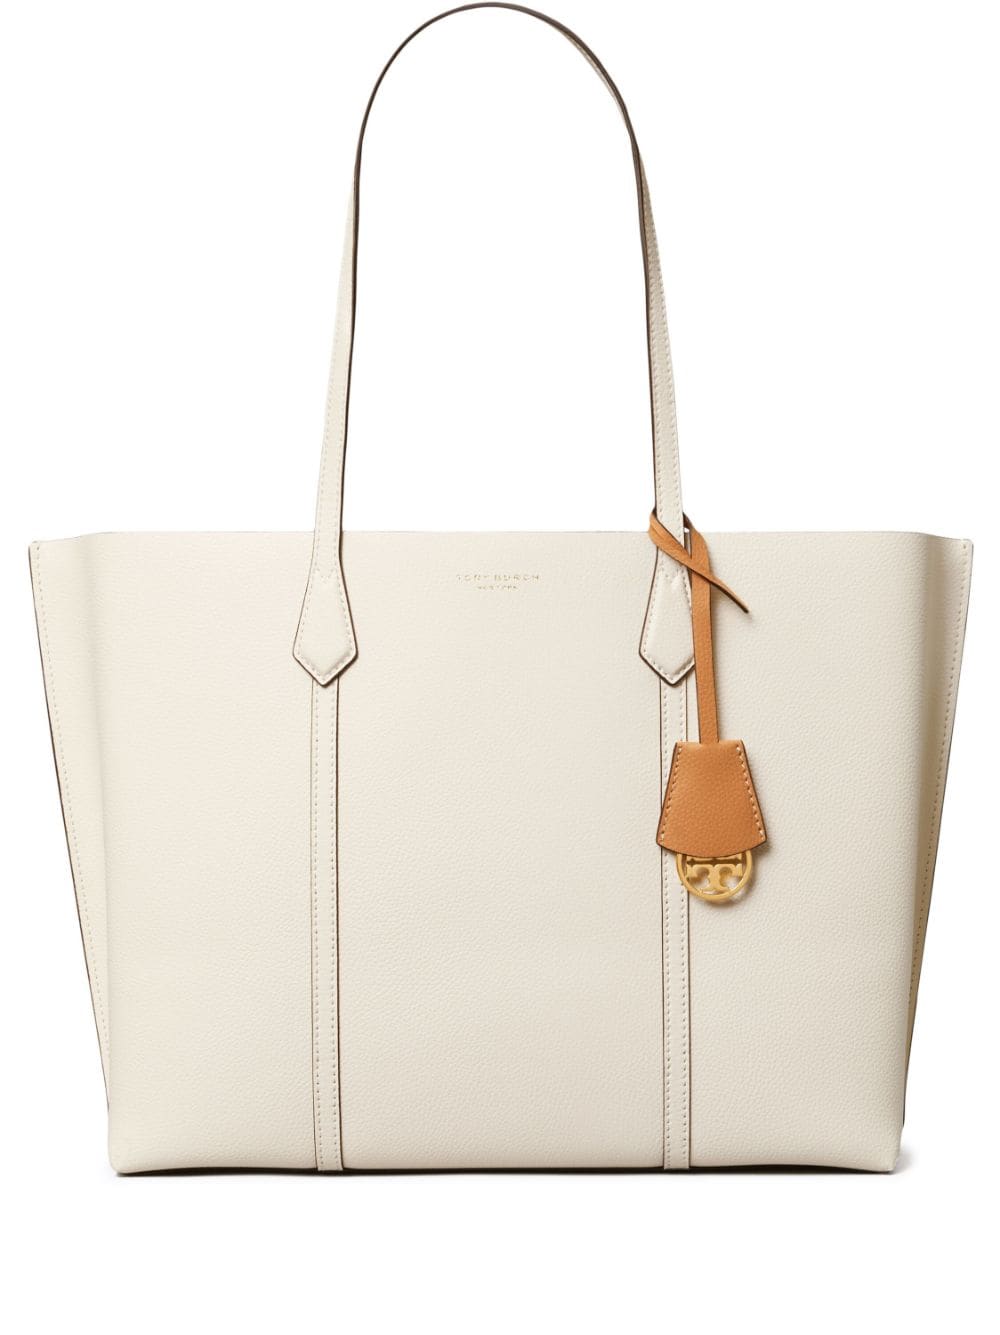 Tory Burch Perry leather tote bag - White von Tory Burch